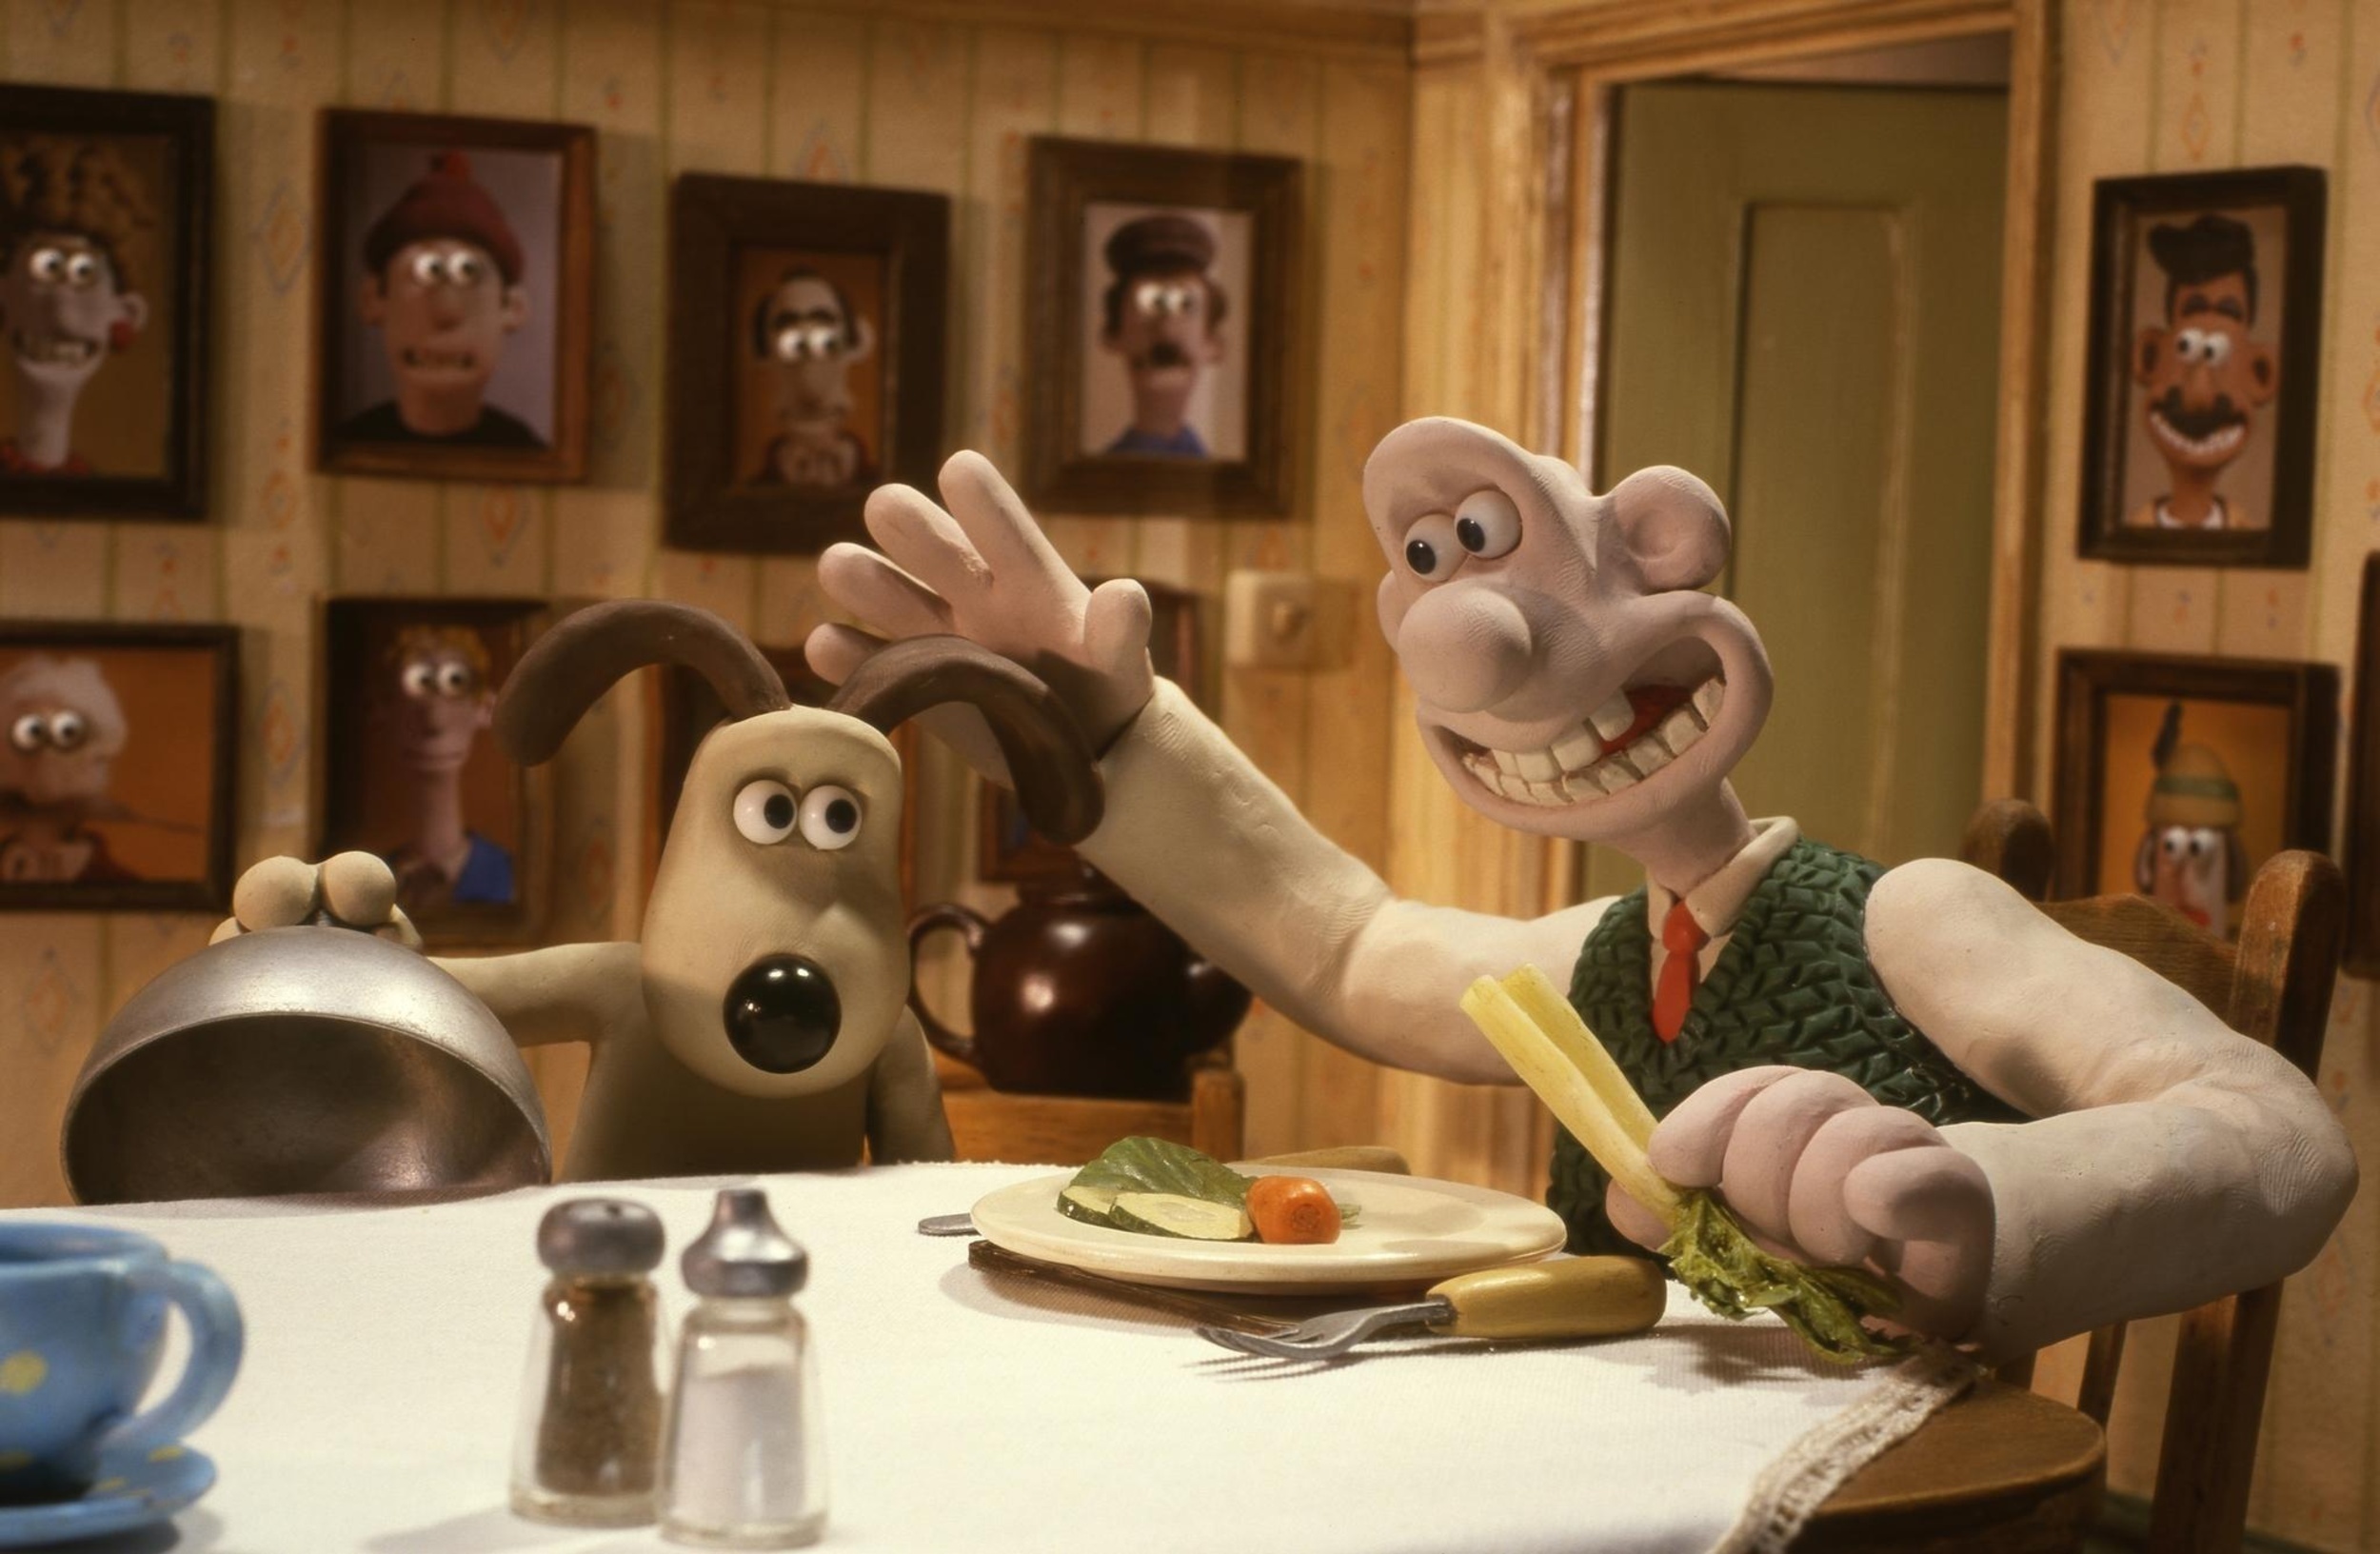 <p>After appearing in a series of shorts, claymation duo Wallace and Gromit finally made their big screen debut in <em>Wallace & Gromit: The Curse of the Were-Rabbit</em>. The film follows the cheese-loving Wallace and his intelligent dog, Gromit, who must track down the beast threatening the village’s Giant Vegetable Competition. Full of heart, wit, and absurdity, the film was a smash hit for DreamWorks and Aardman, winning the Oscar for Best Animated Feature. </p><p><a href='https://www.msn.com/en-us/community/channel/vid-cj9pqbr0vn9in2b6ddcd8sfgpfq6x6utp44fssrv6mc2gtybw0us'>Follow us on MSN to see more of our exclusive entertainment content.</a></p>